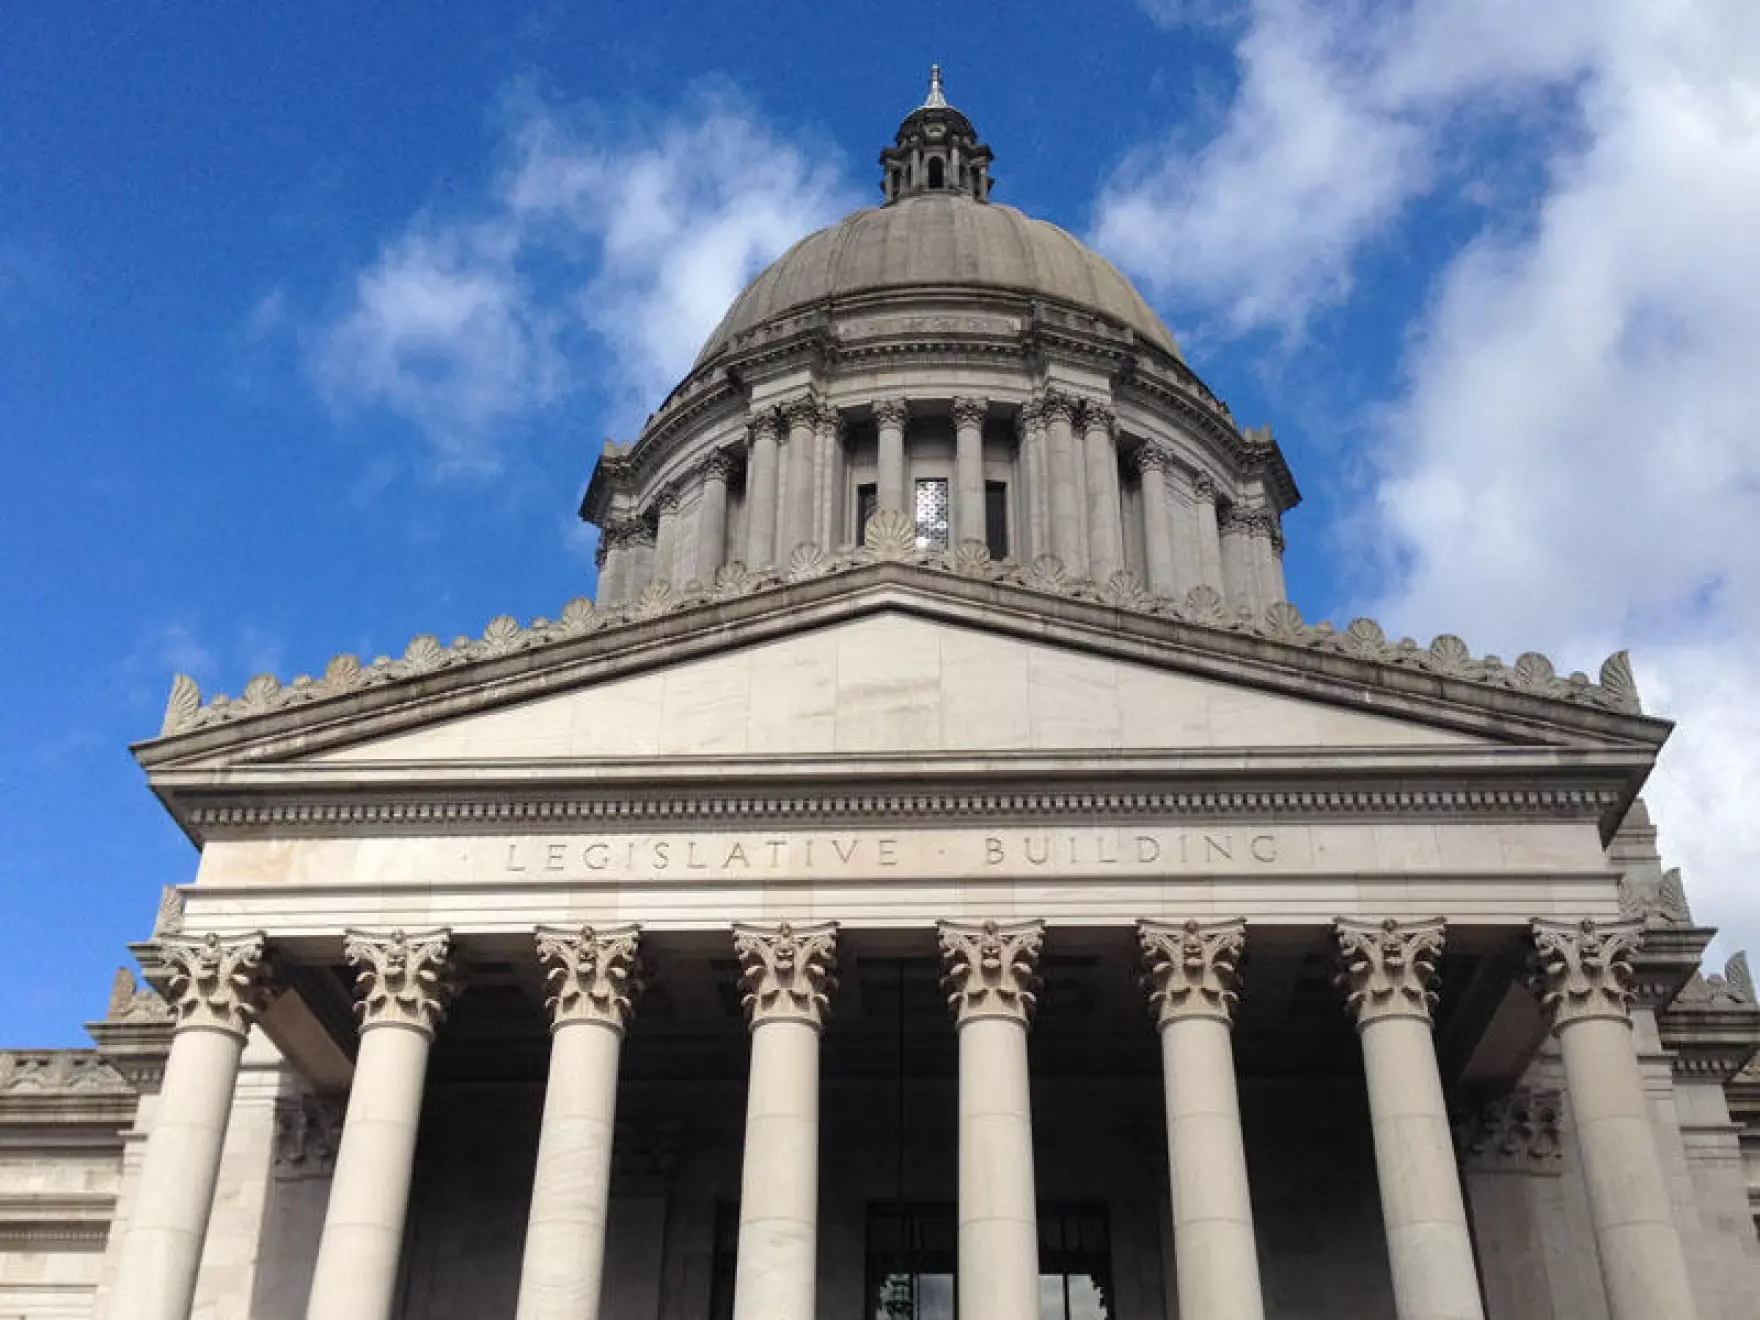 The legislature is meeting to finalize a state-level policy on drug possession and addiction treatment, to avoid a patchwork approach across the state